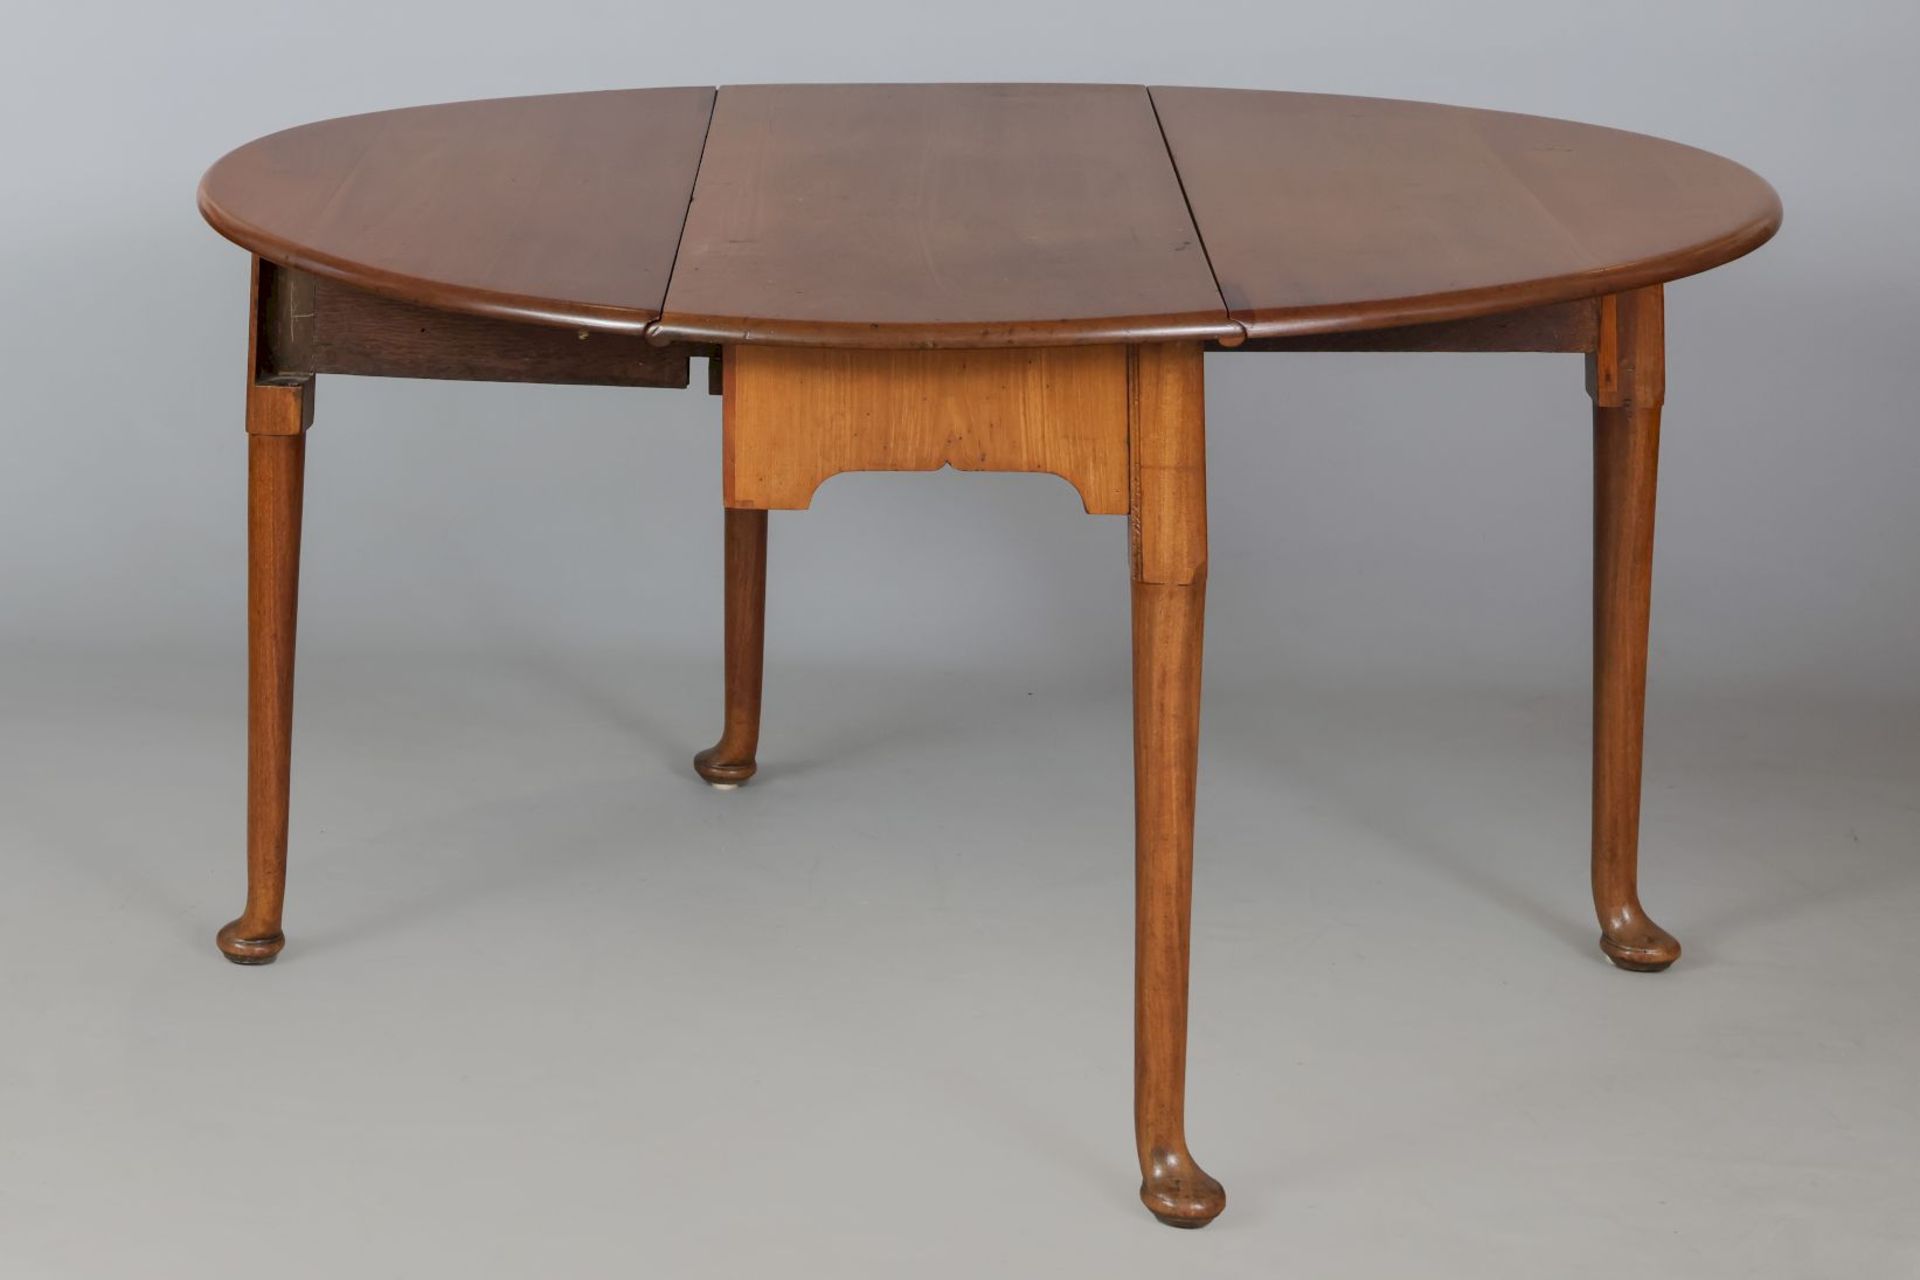 Englischer drop-leaf table - Image 2 of 3